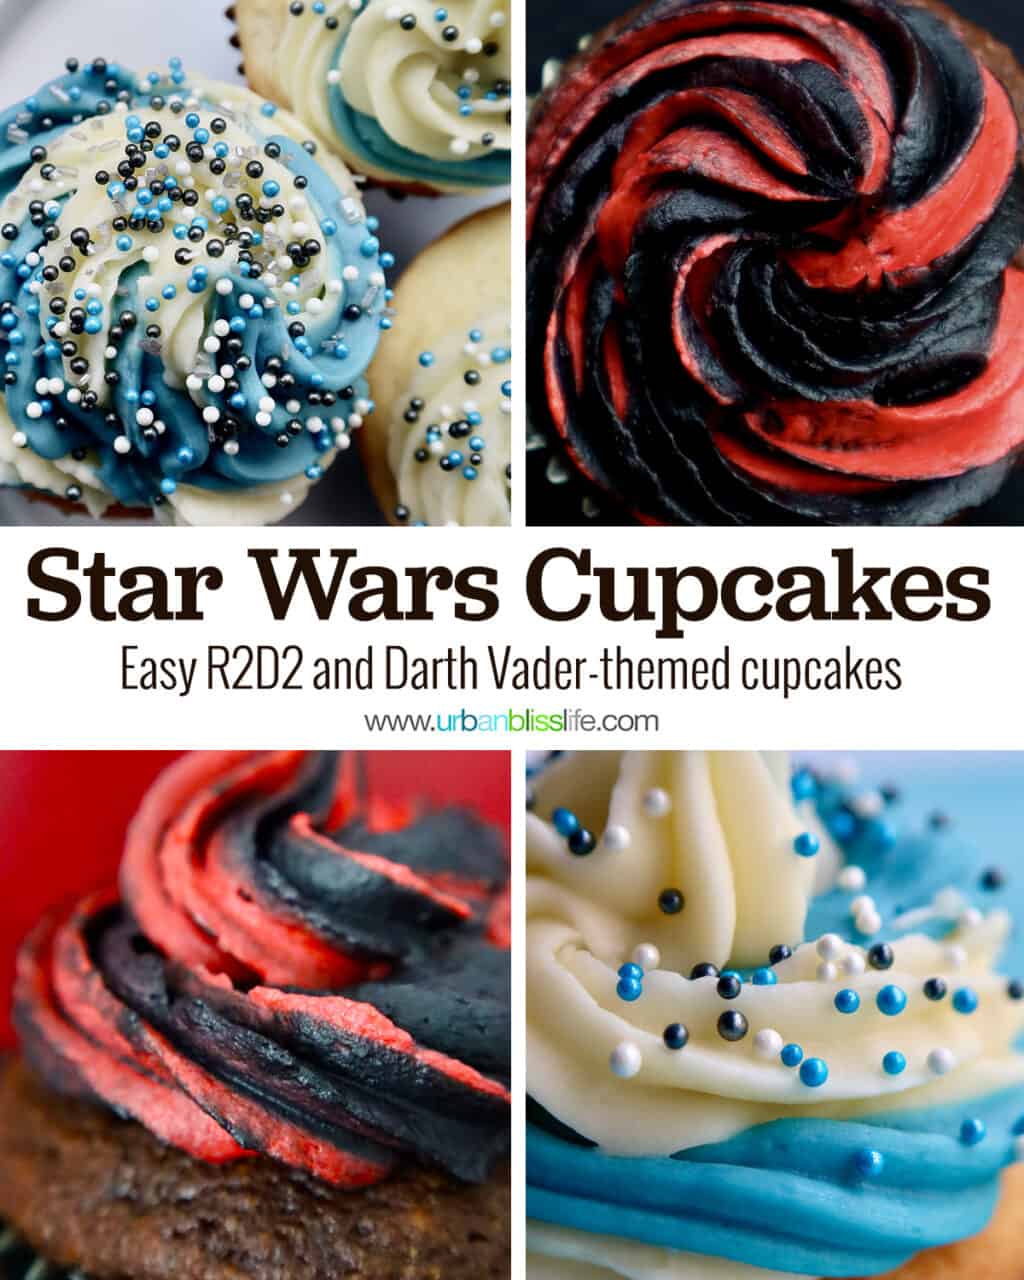 photos of R2D2 white and blue cupcakes and Darth Vader red and black cupcakes with title text that reads "Star Wars Cupcakes."